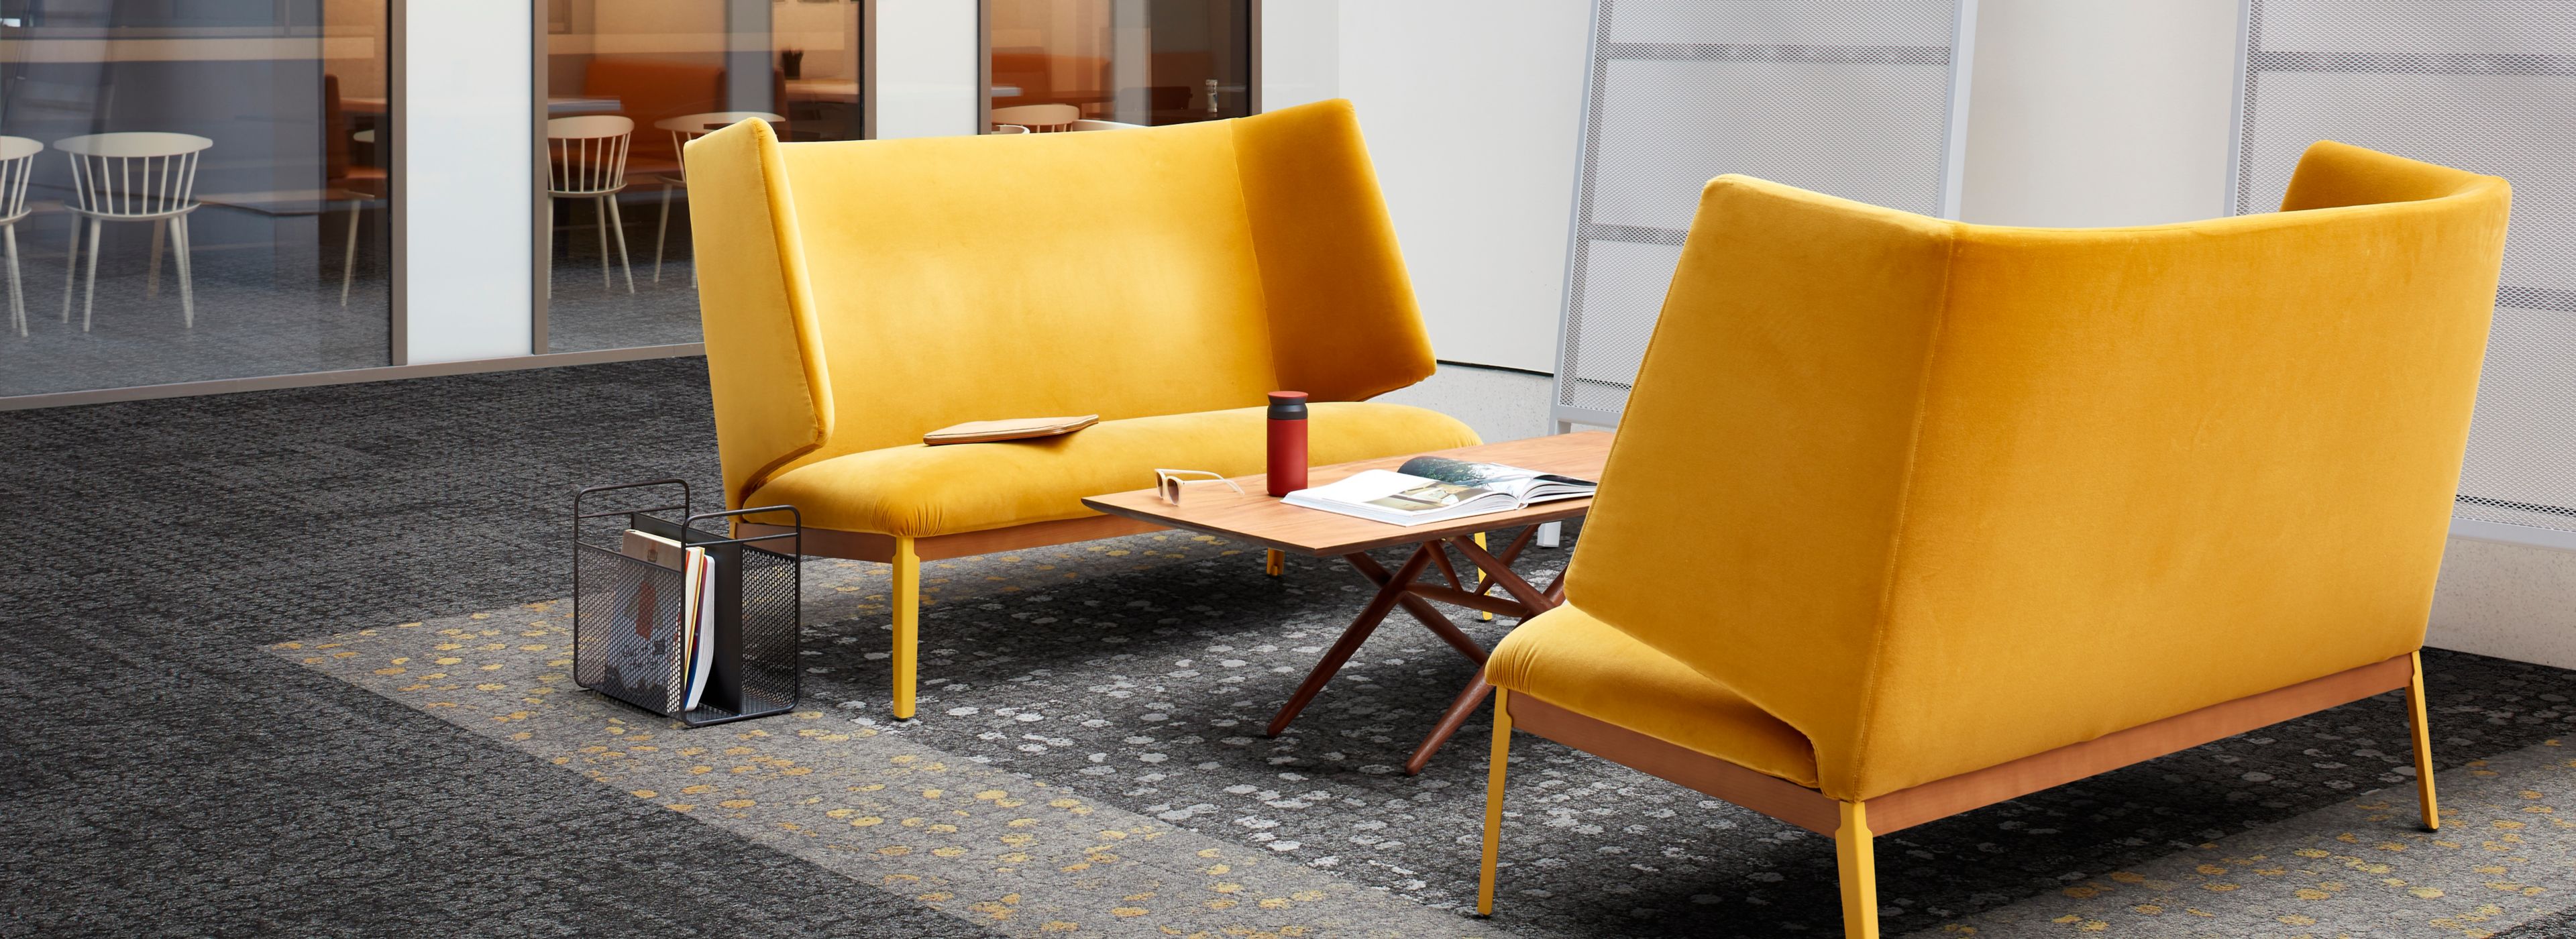 image Interface Mercer Street and Broome Street carpet tile in seating area with two yellow couches numéro 1